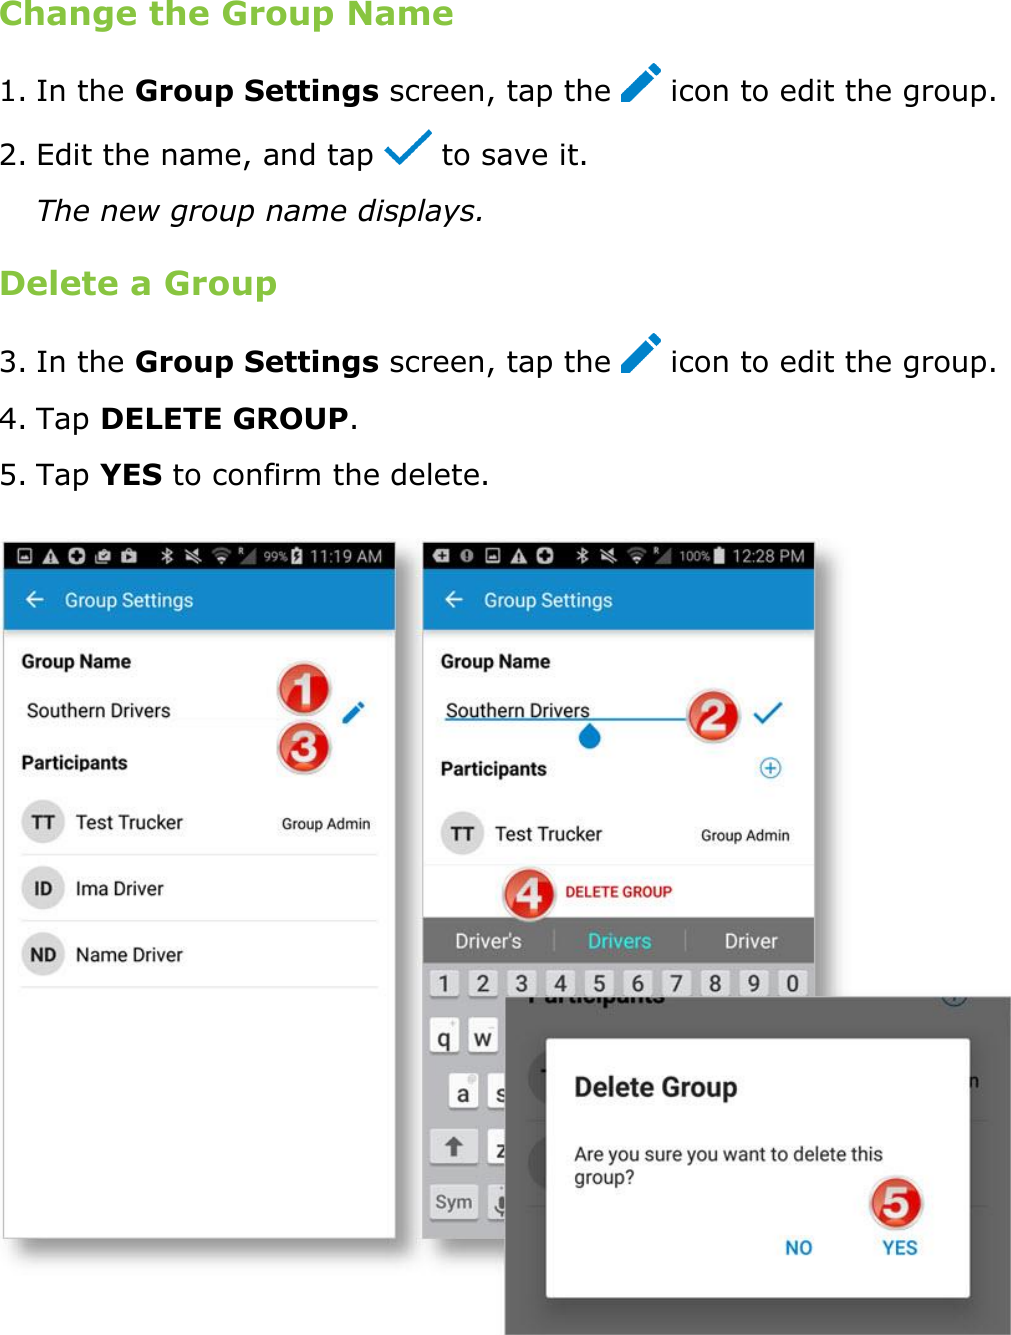 Send Messages, Forms, and Workflows DriverConnect User Guide  75 © 2017, Rand McNally, Inc. Change the Group Name 1. In the Group Settings screen, tap the   icon to edit the group. 2. Edit the name, and tap   to save it. The new group name displays. Delete a Group 3. In the Group Settings screen, tap the   icon to edit the group. 4. Tap DELETE GROUP. 5. Tap YES to confirm the delete.  